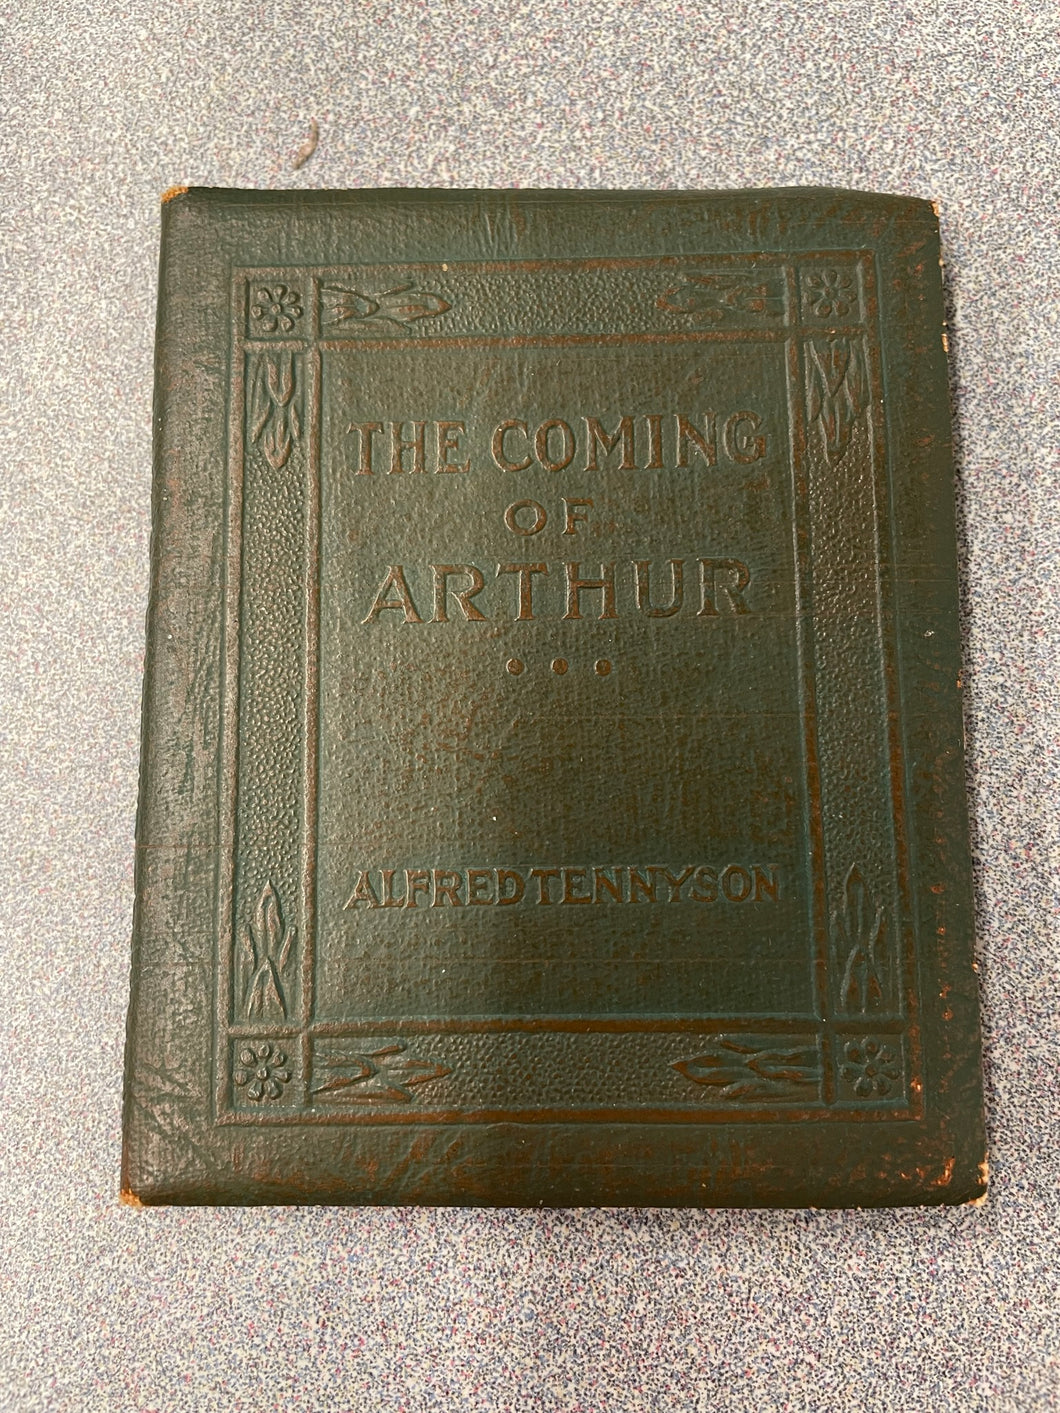 Tennyson, Alfred, The Coming of Arthur [c. 1922] CL 5/23